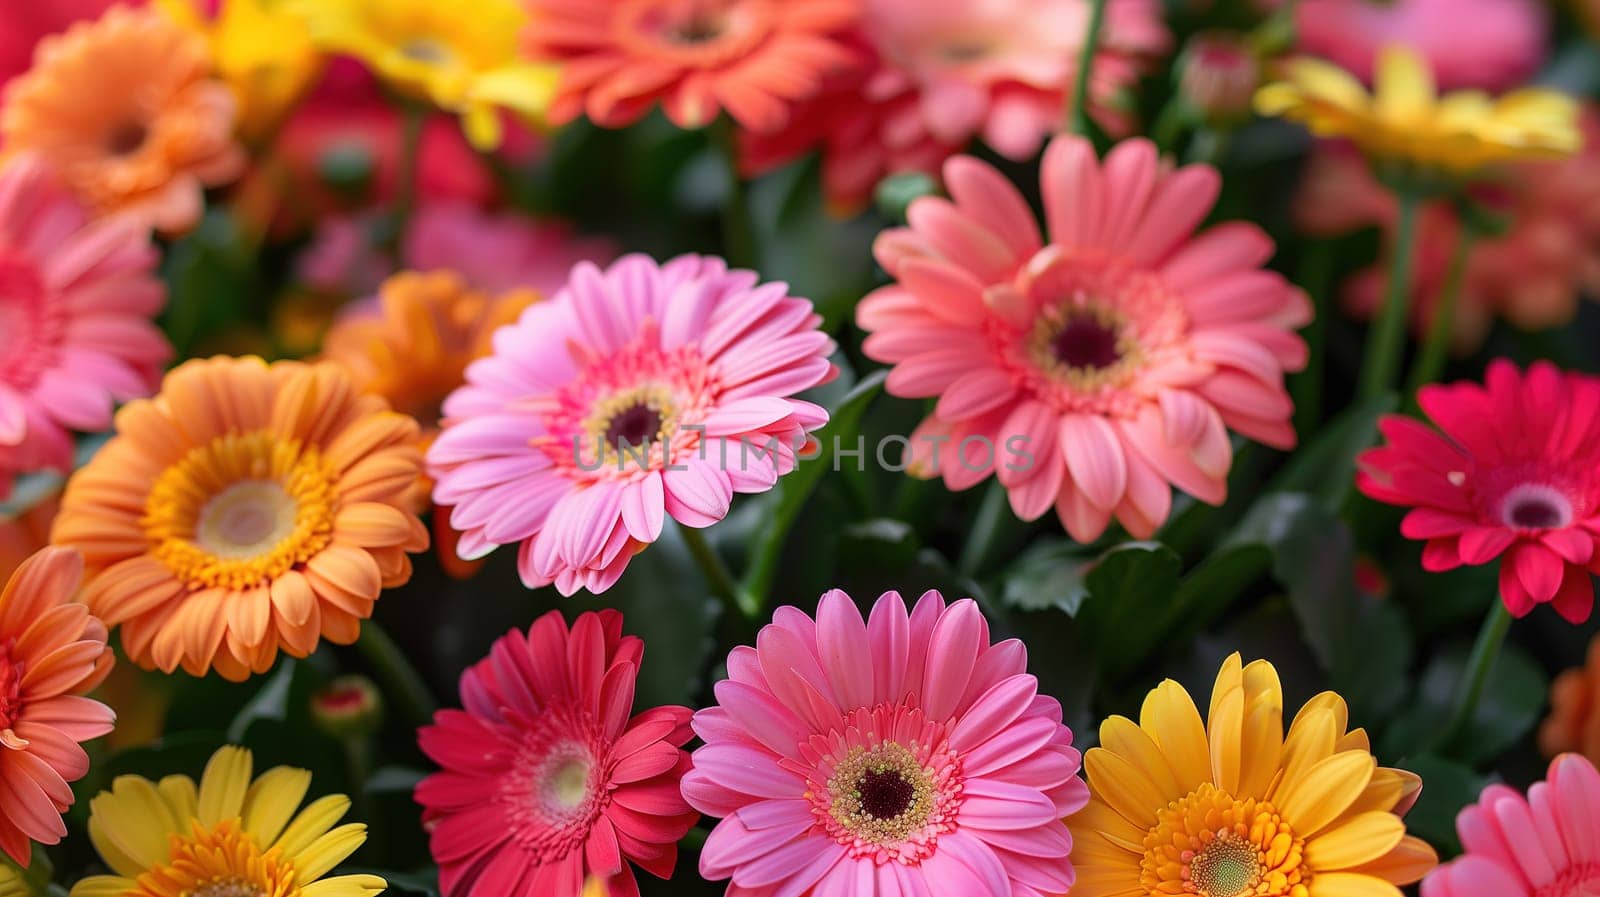 A close-up view of a bunch of multi-colored flowers, showcasing their vivid petals, intricate details, and varied shapes. The flowers are tightly clustered together, creating a burst of color and beauty in the frame.